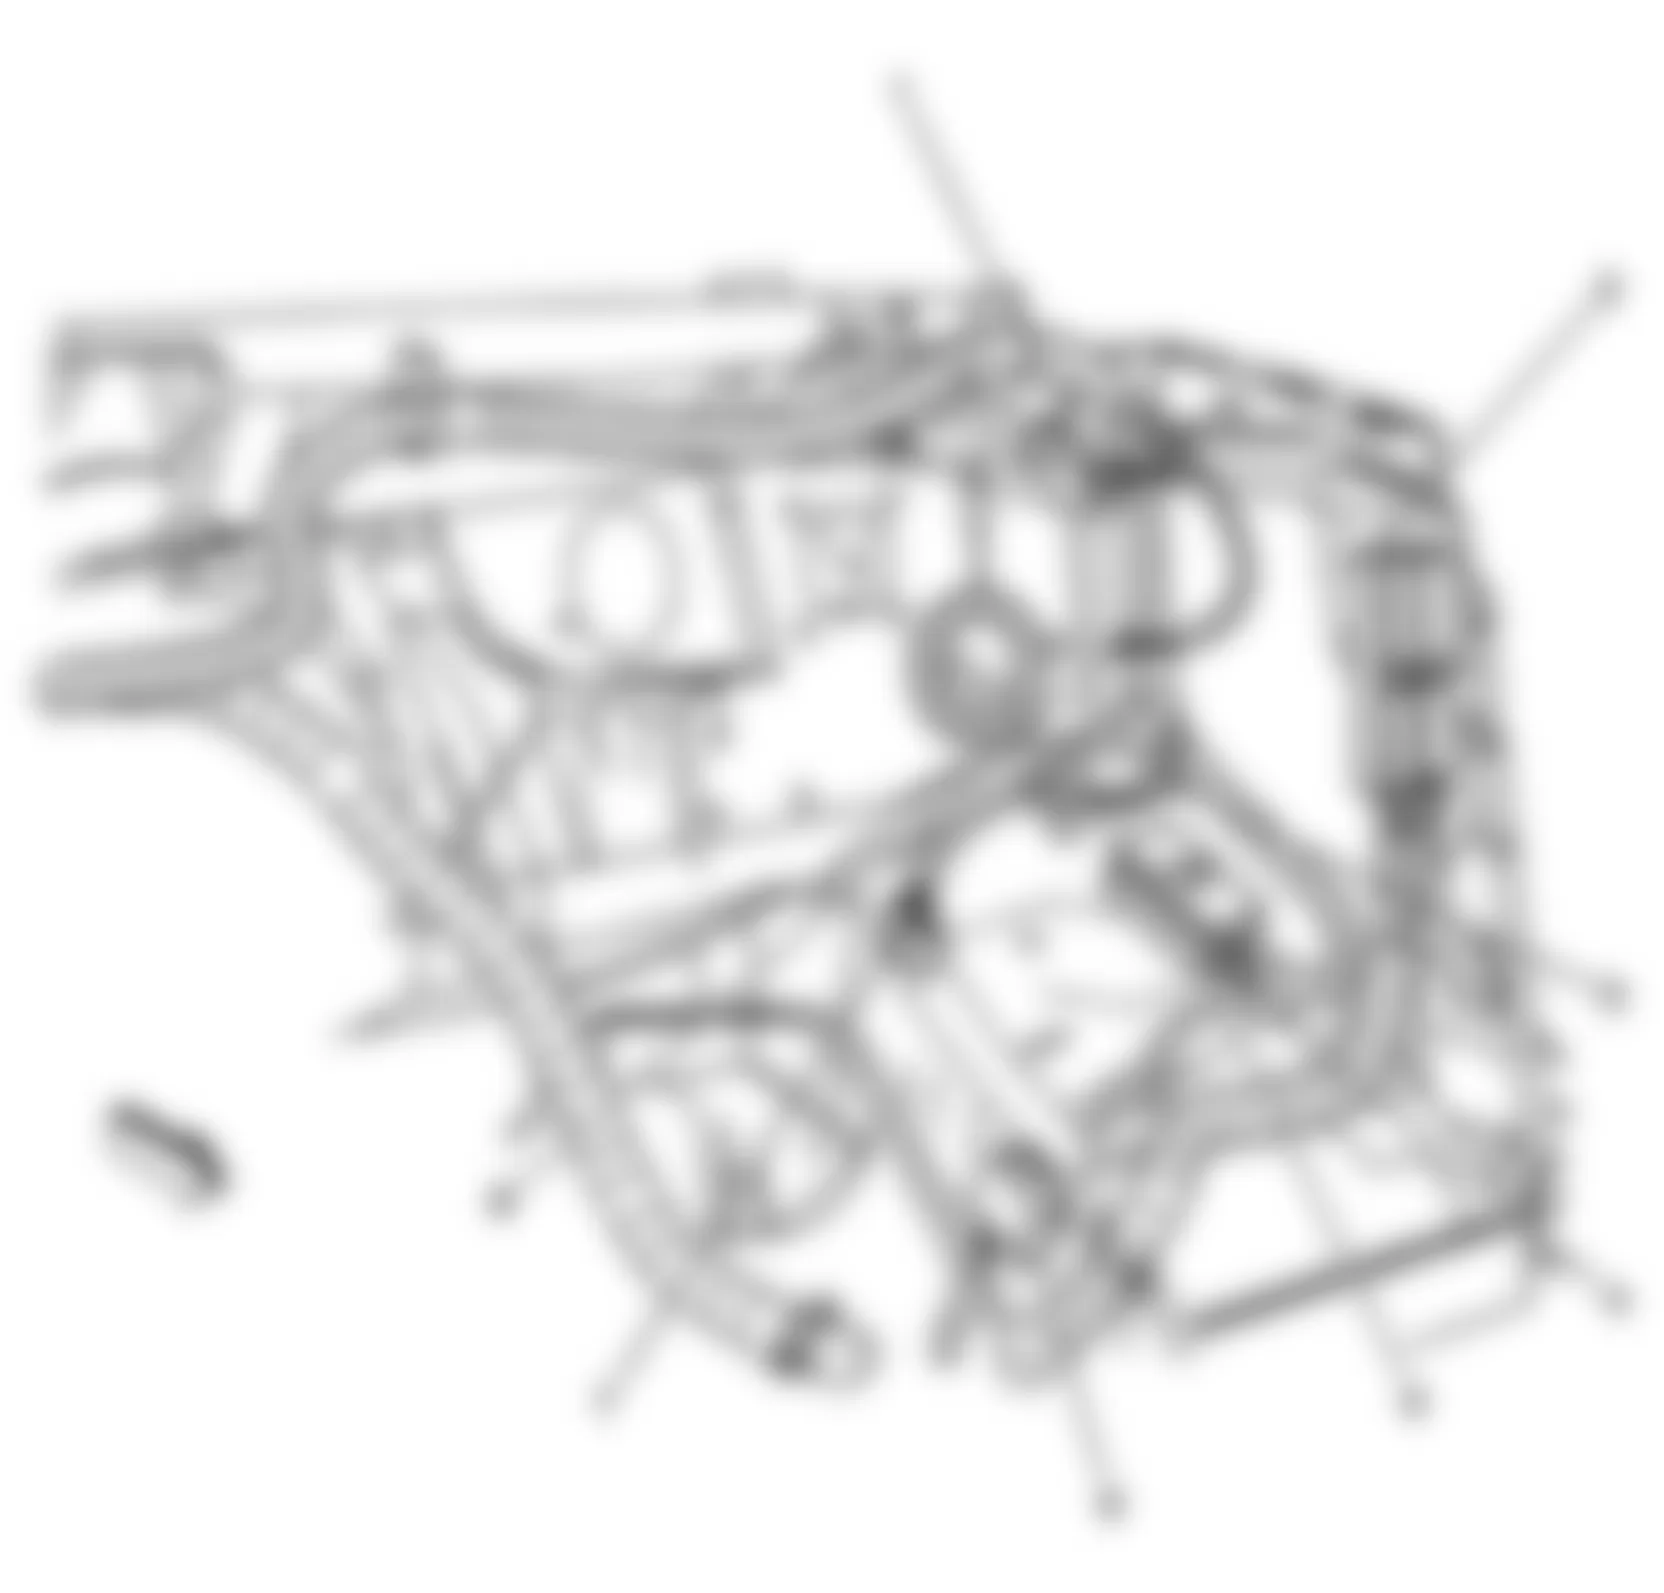 GMC Savana G1500 2009 - Component Locations -  Left Rear Of Engine Compartment